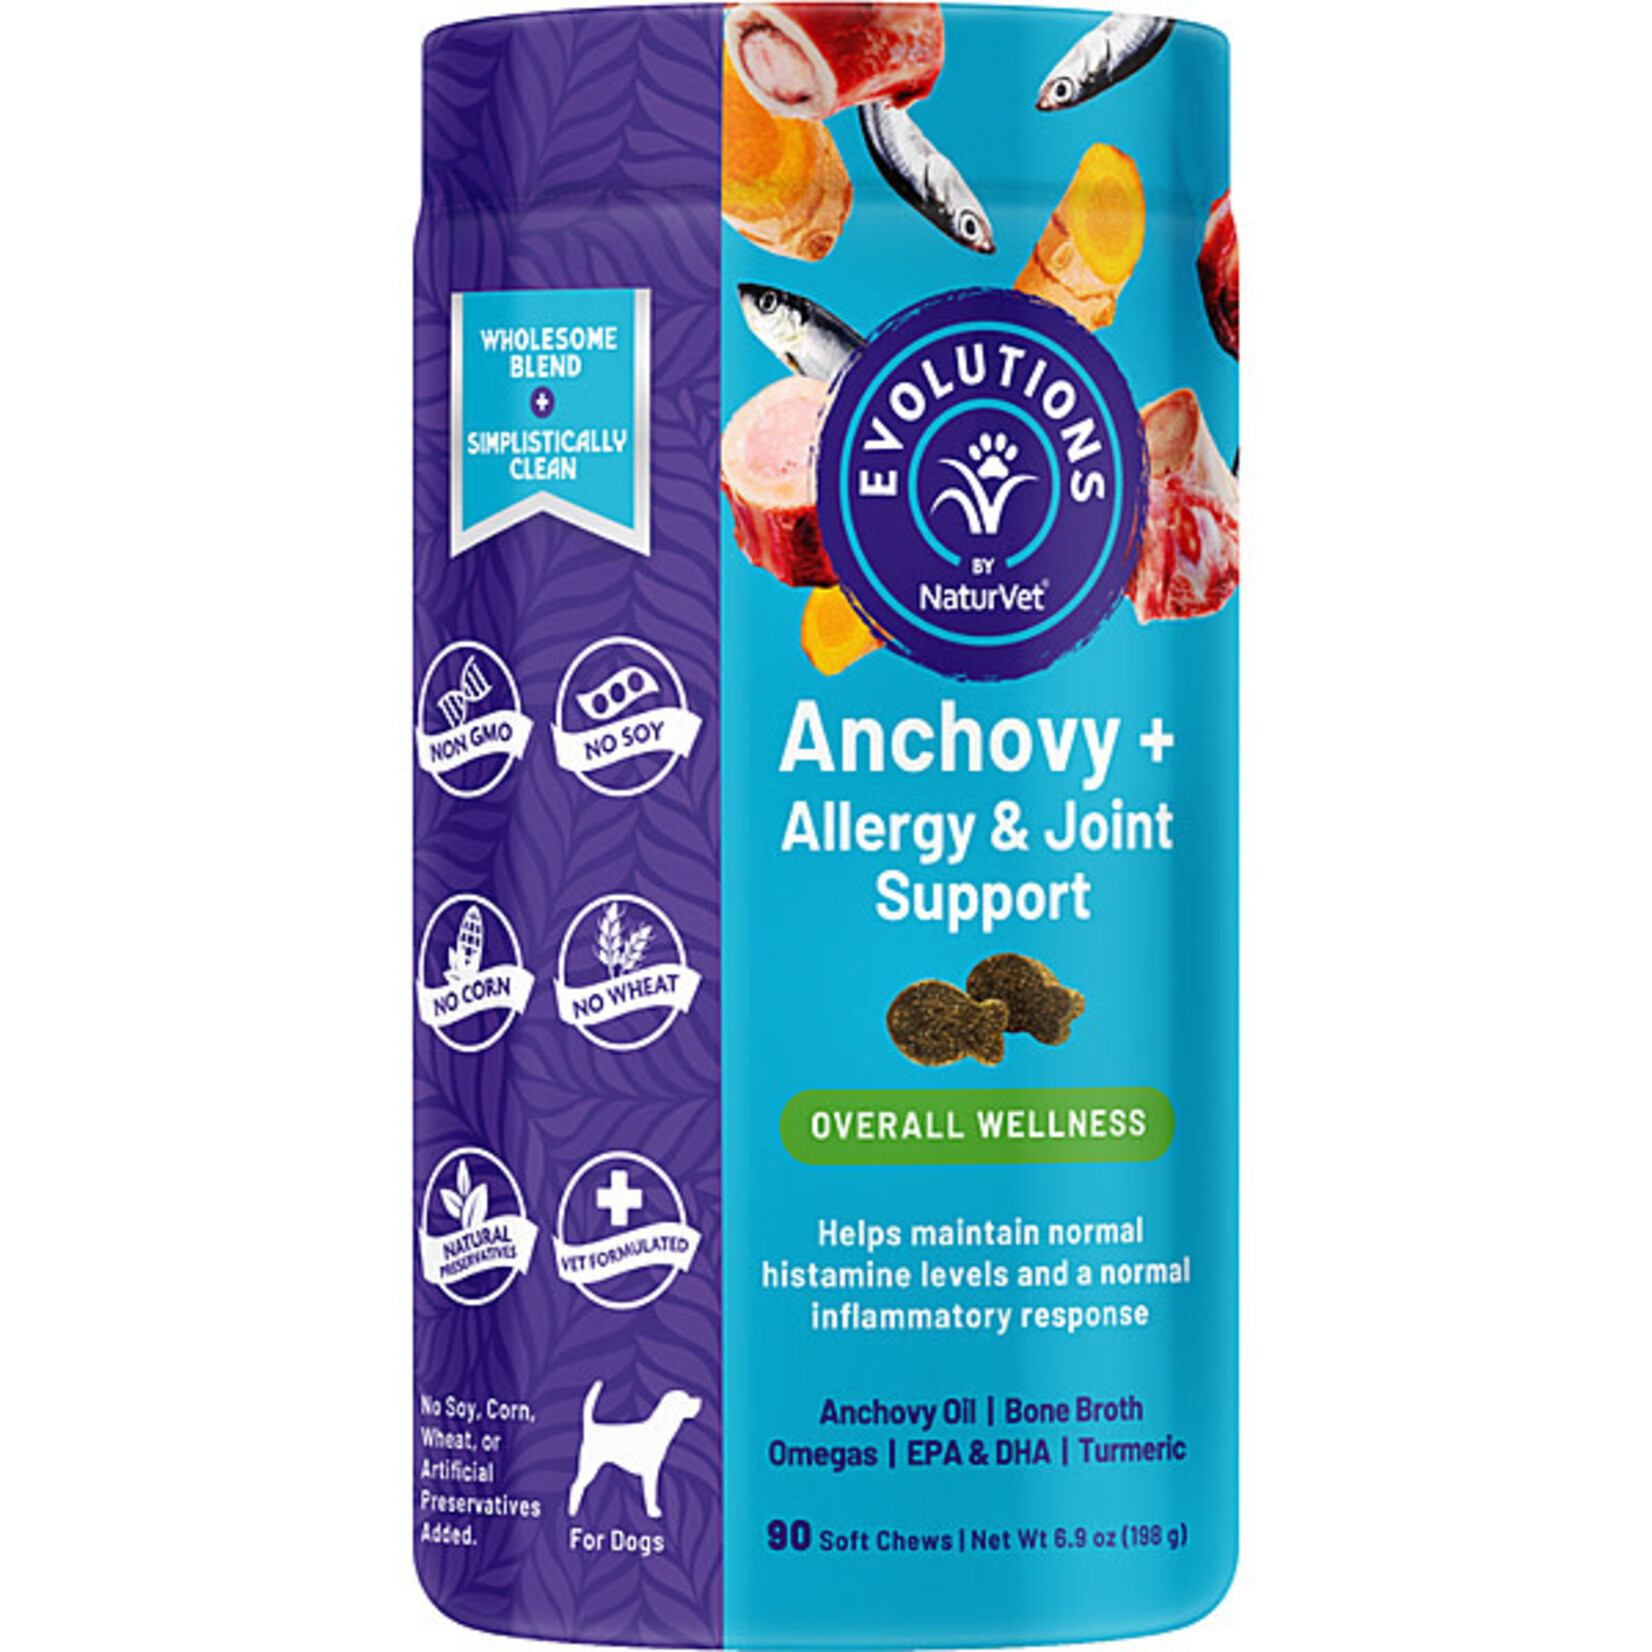 NaturVet Anchovy + Allergy & Joint Support 90 soft chews